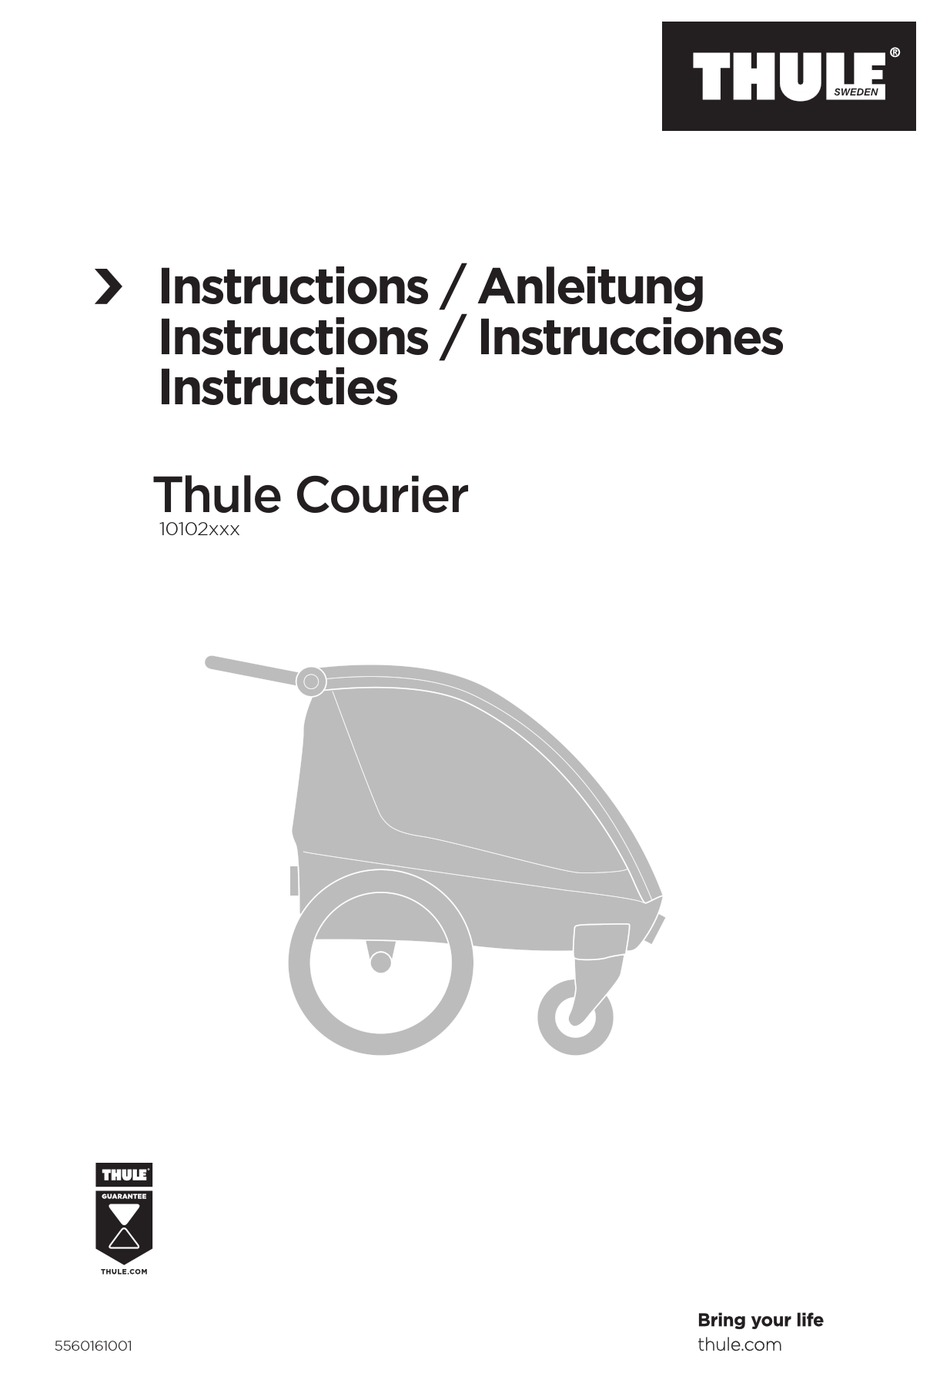 THULE COURIER 10102 SERIES INSTRUCTIONS MANUAL Pdf Download | ManualsLib